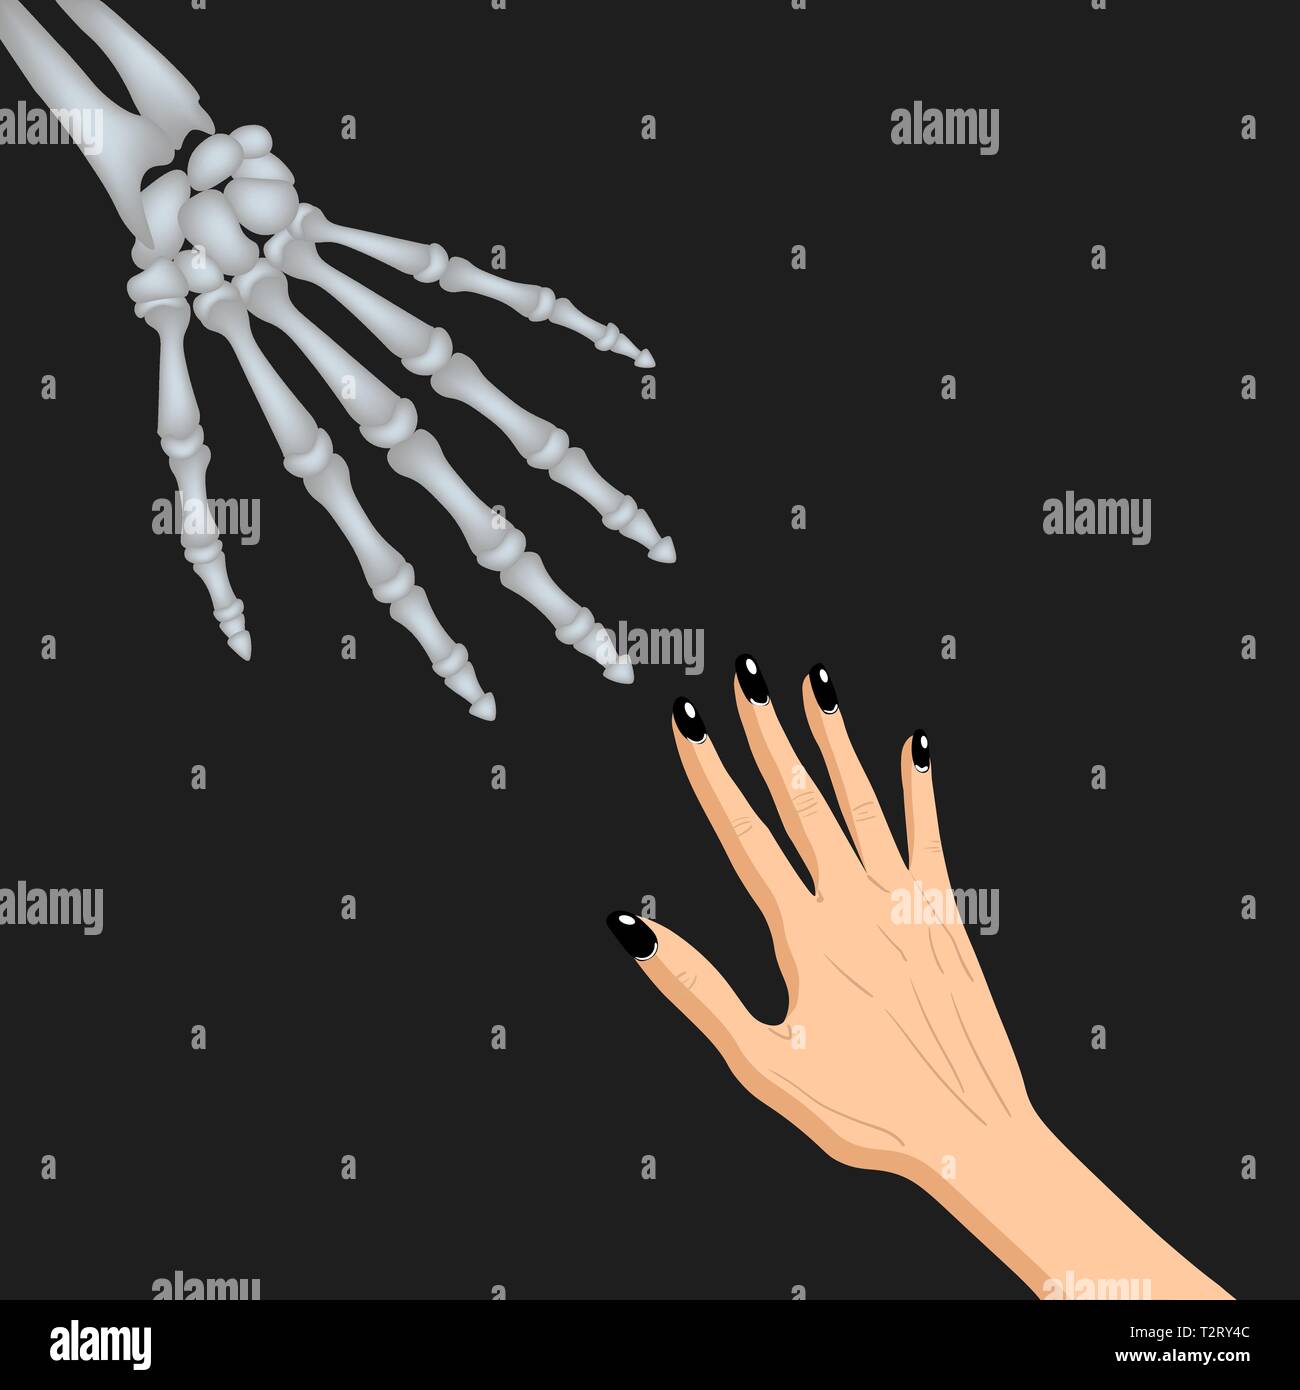 Adead skeleton hand and a human hand together, vector illustration isolated Stock Vector